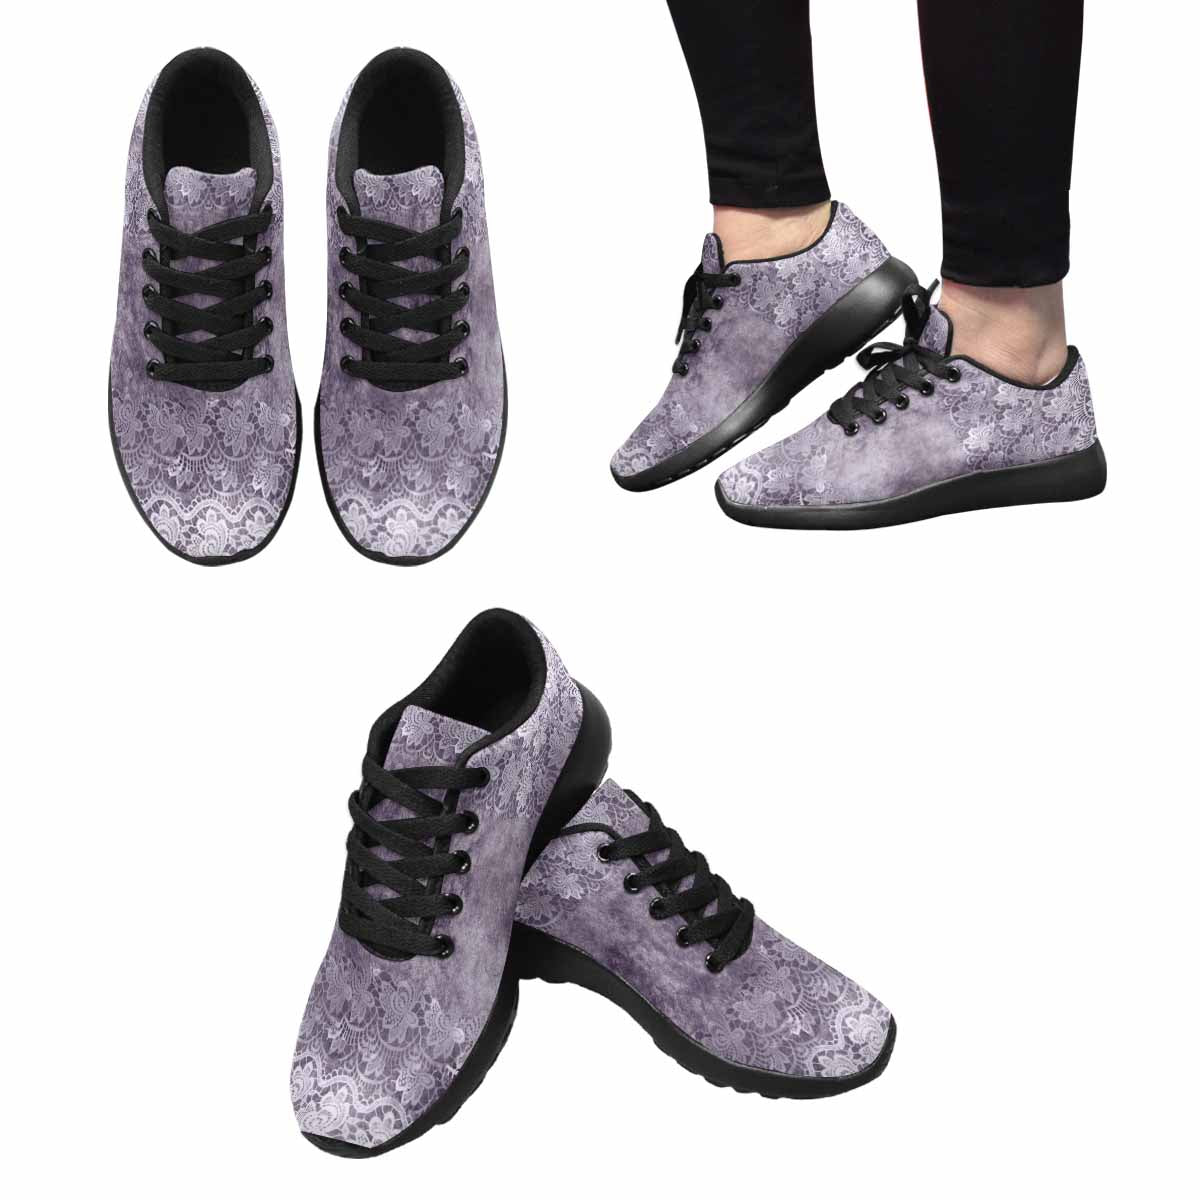 Victorian lace print, womens cute casual or running sneakers, design 39